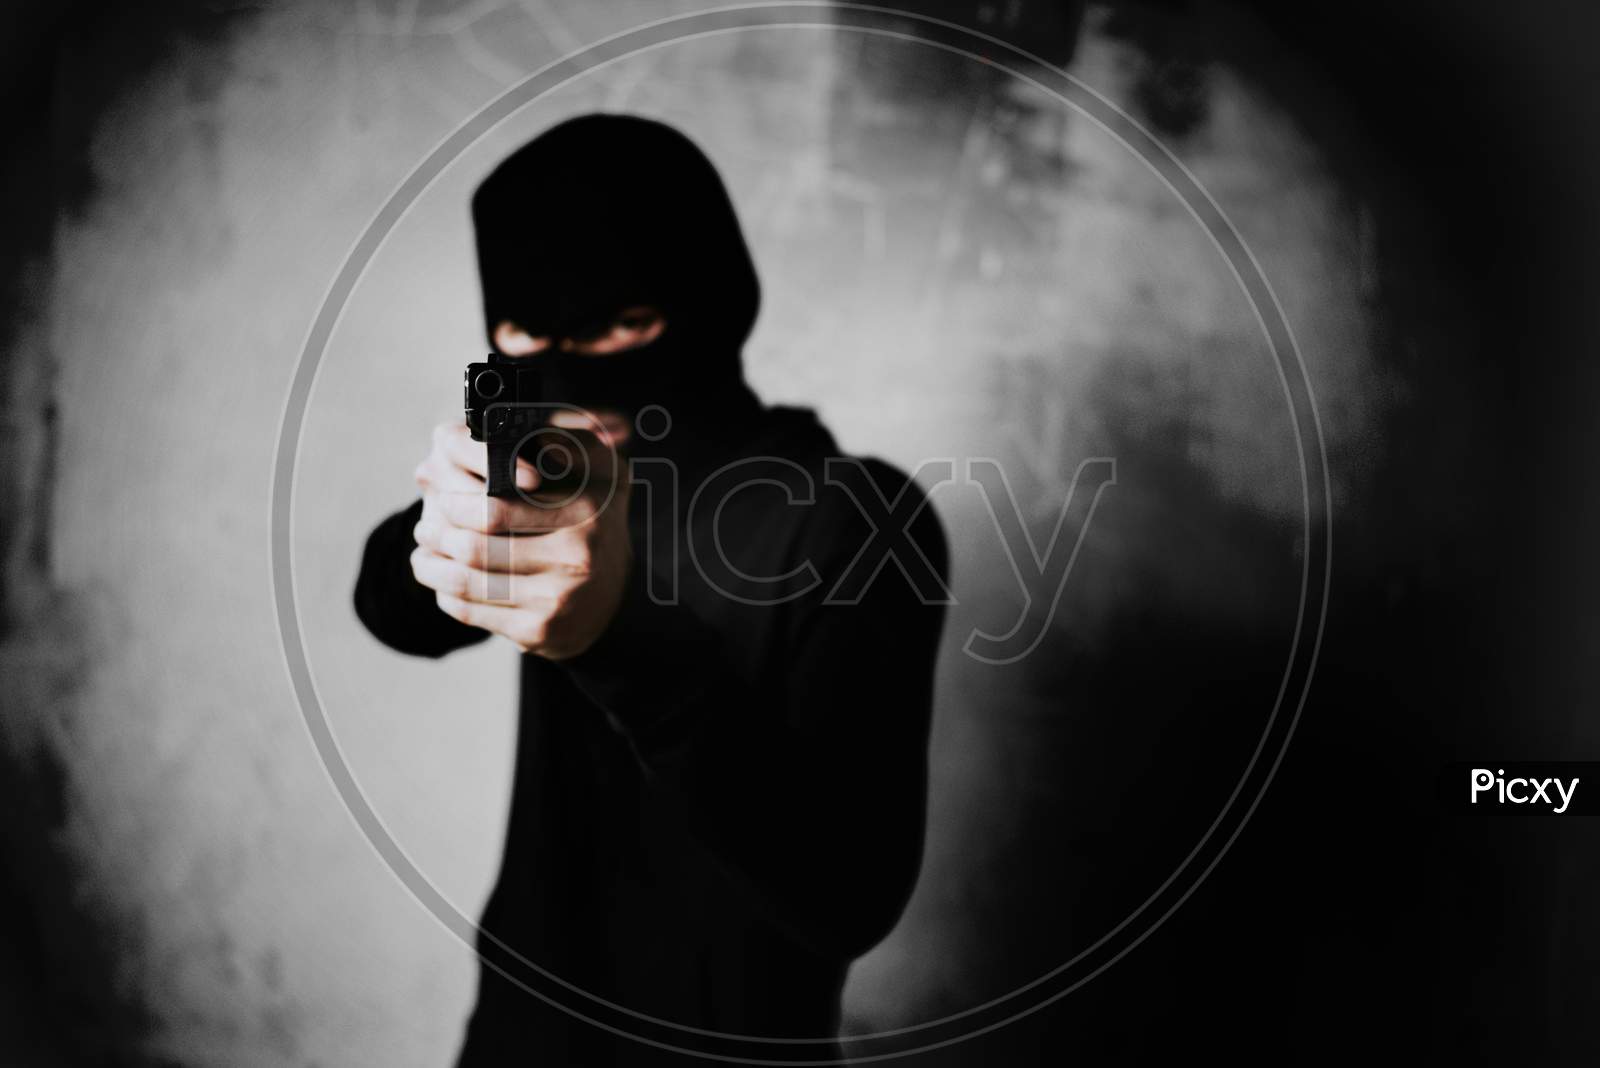 Terrorist Shooting With His Mini Gun Weapon With Grunge Room Wall Background. Criminal And Dangerous Illegal People Concept. Terrorist And War Theme. Dark Tone And High Contrast Use